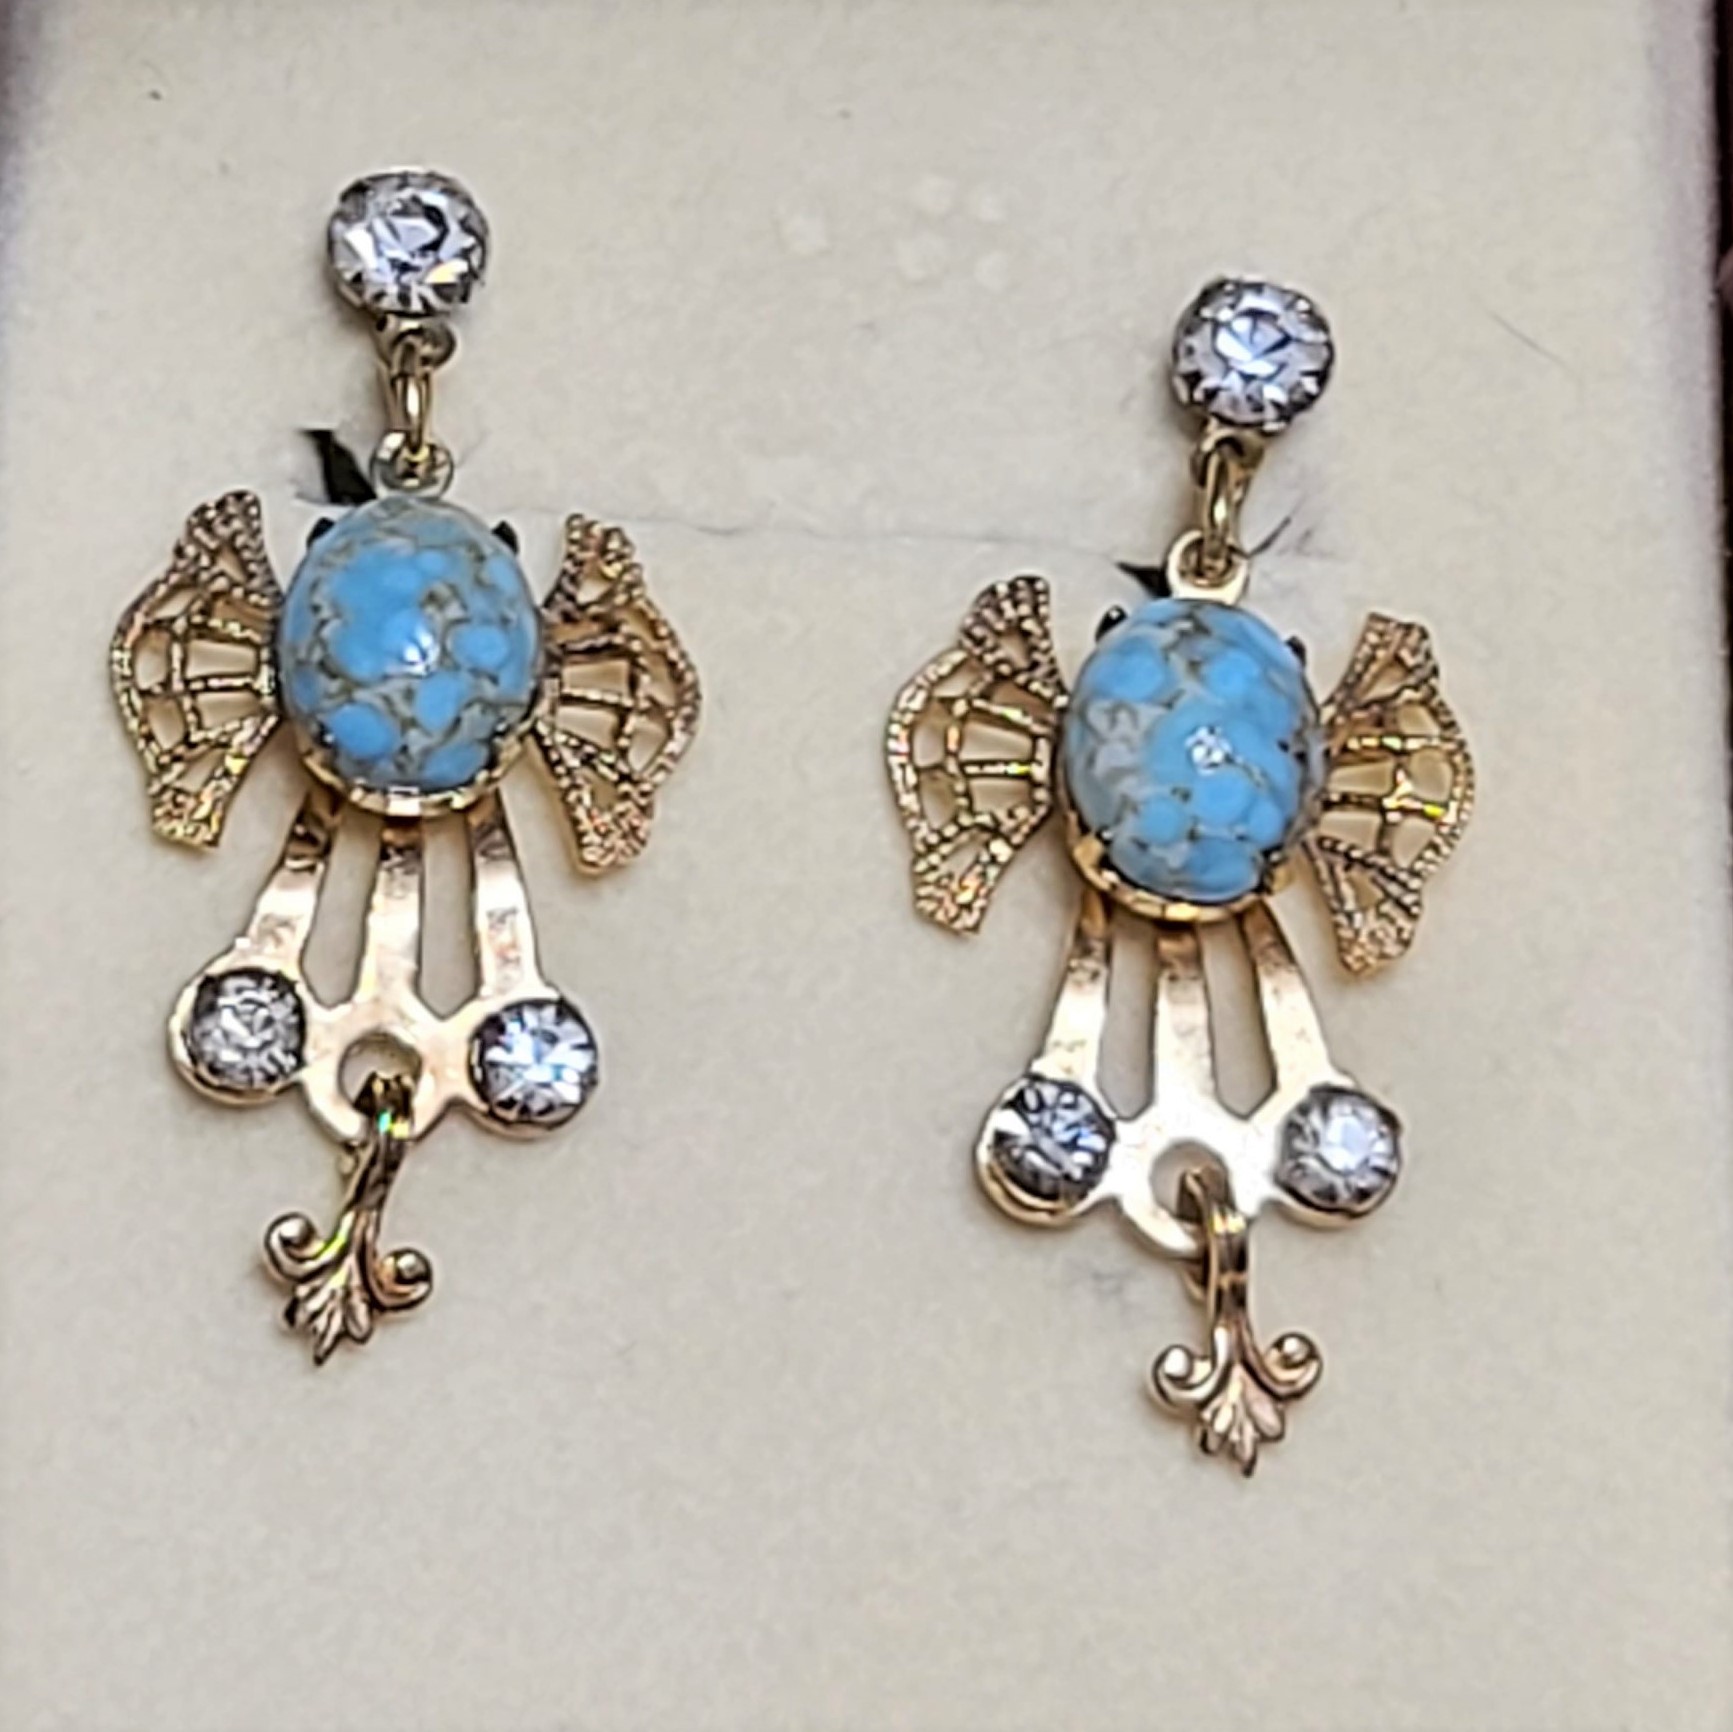 Art Deco Robin's Egg cabachon Scew Back Earrings Signed Arco 12k